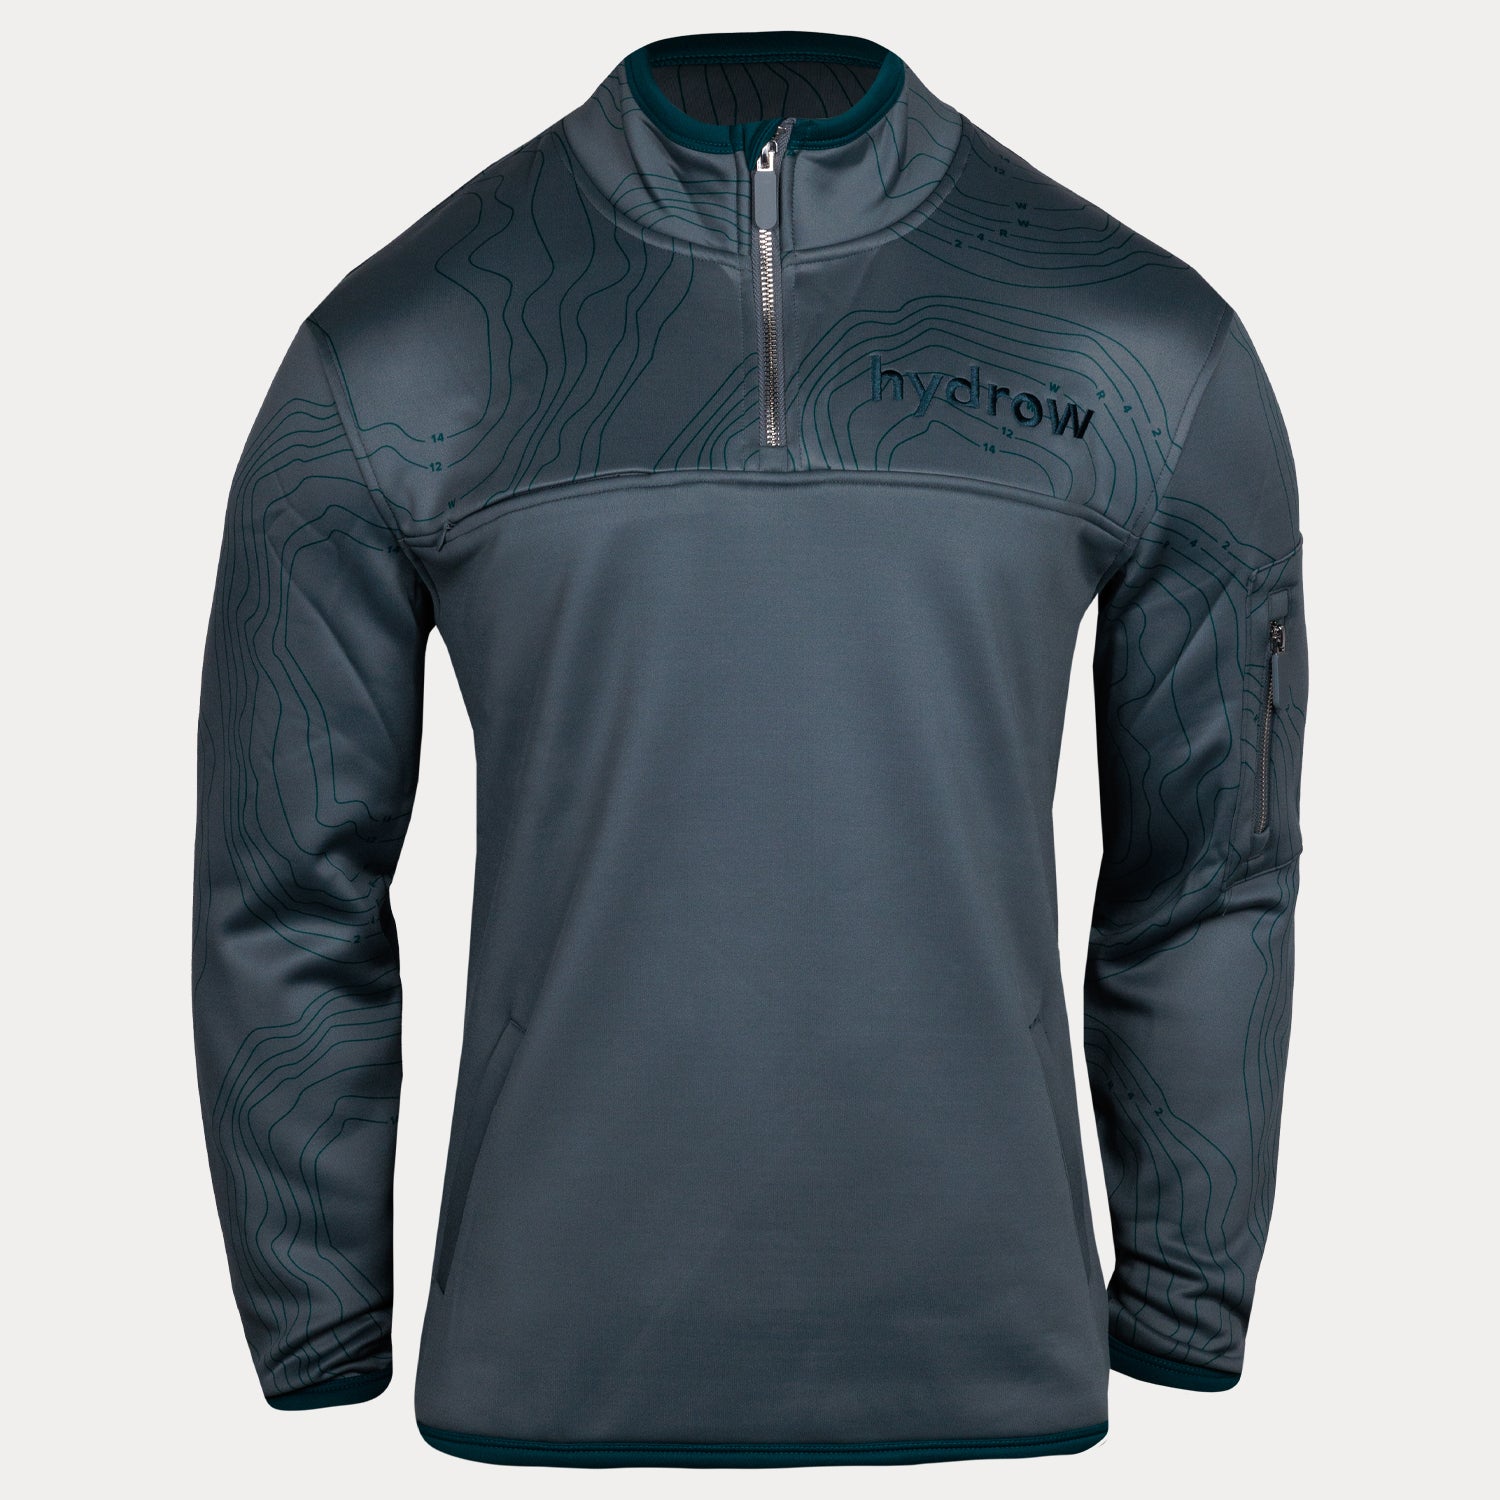 gray 1/4 zip pullover with bathymetric lines on shoulders and sleeves and hydrow logo on left chest